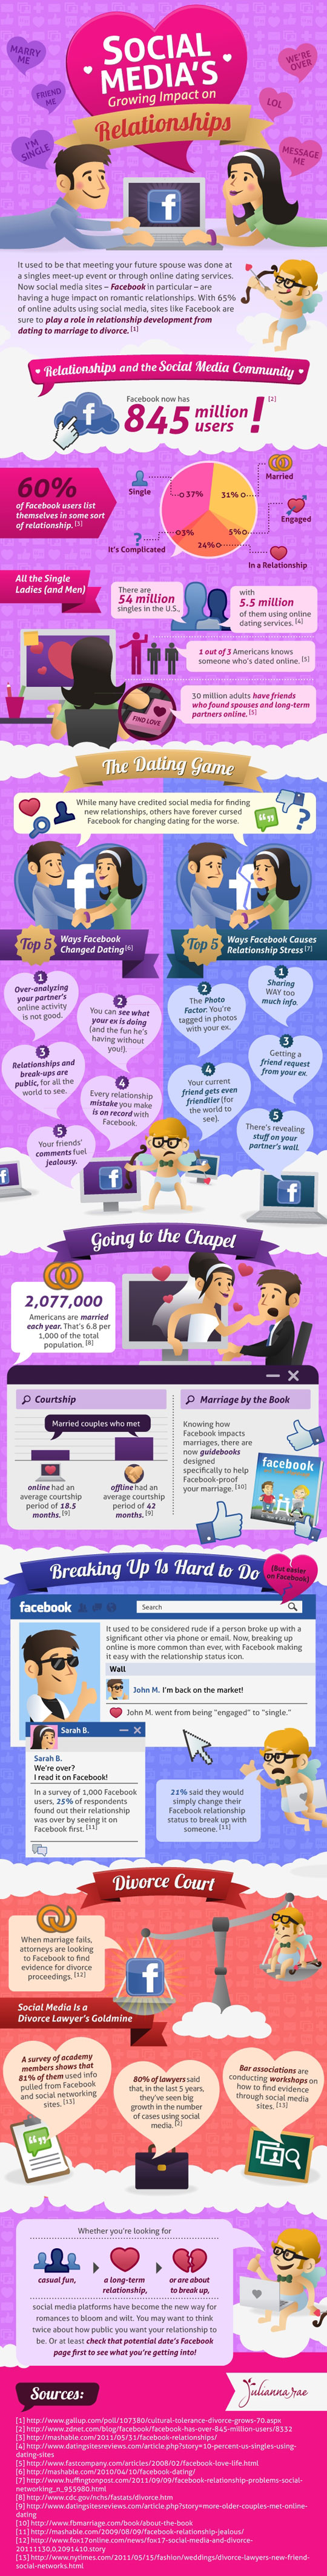 Social Media's Growing Impact on Relationships 